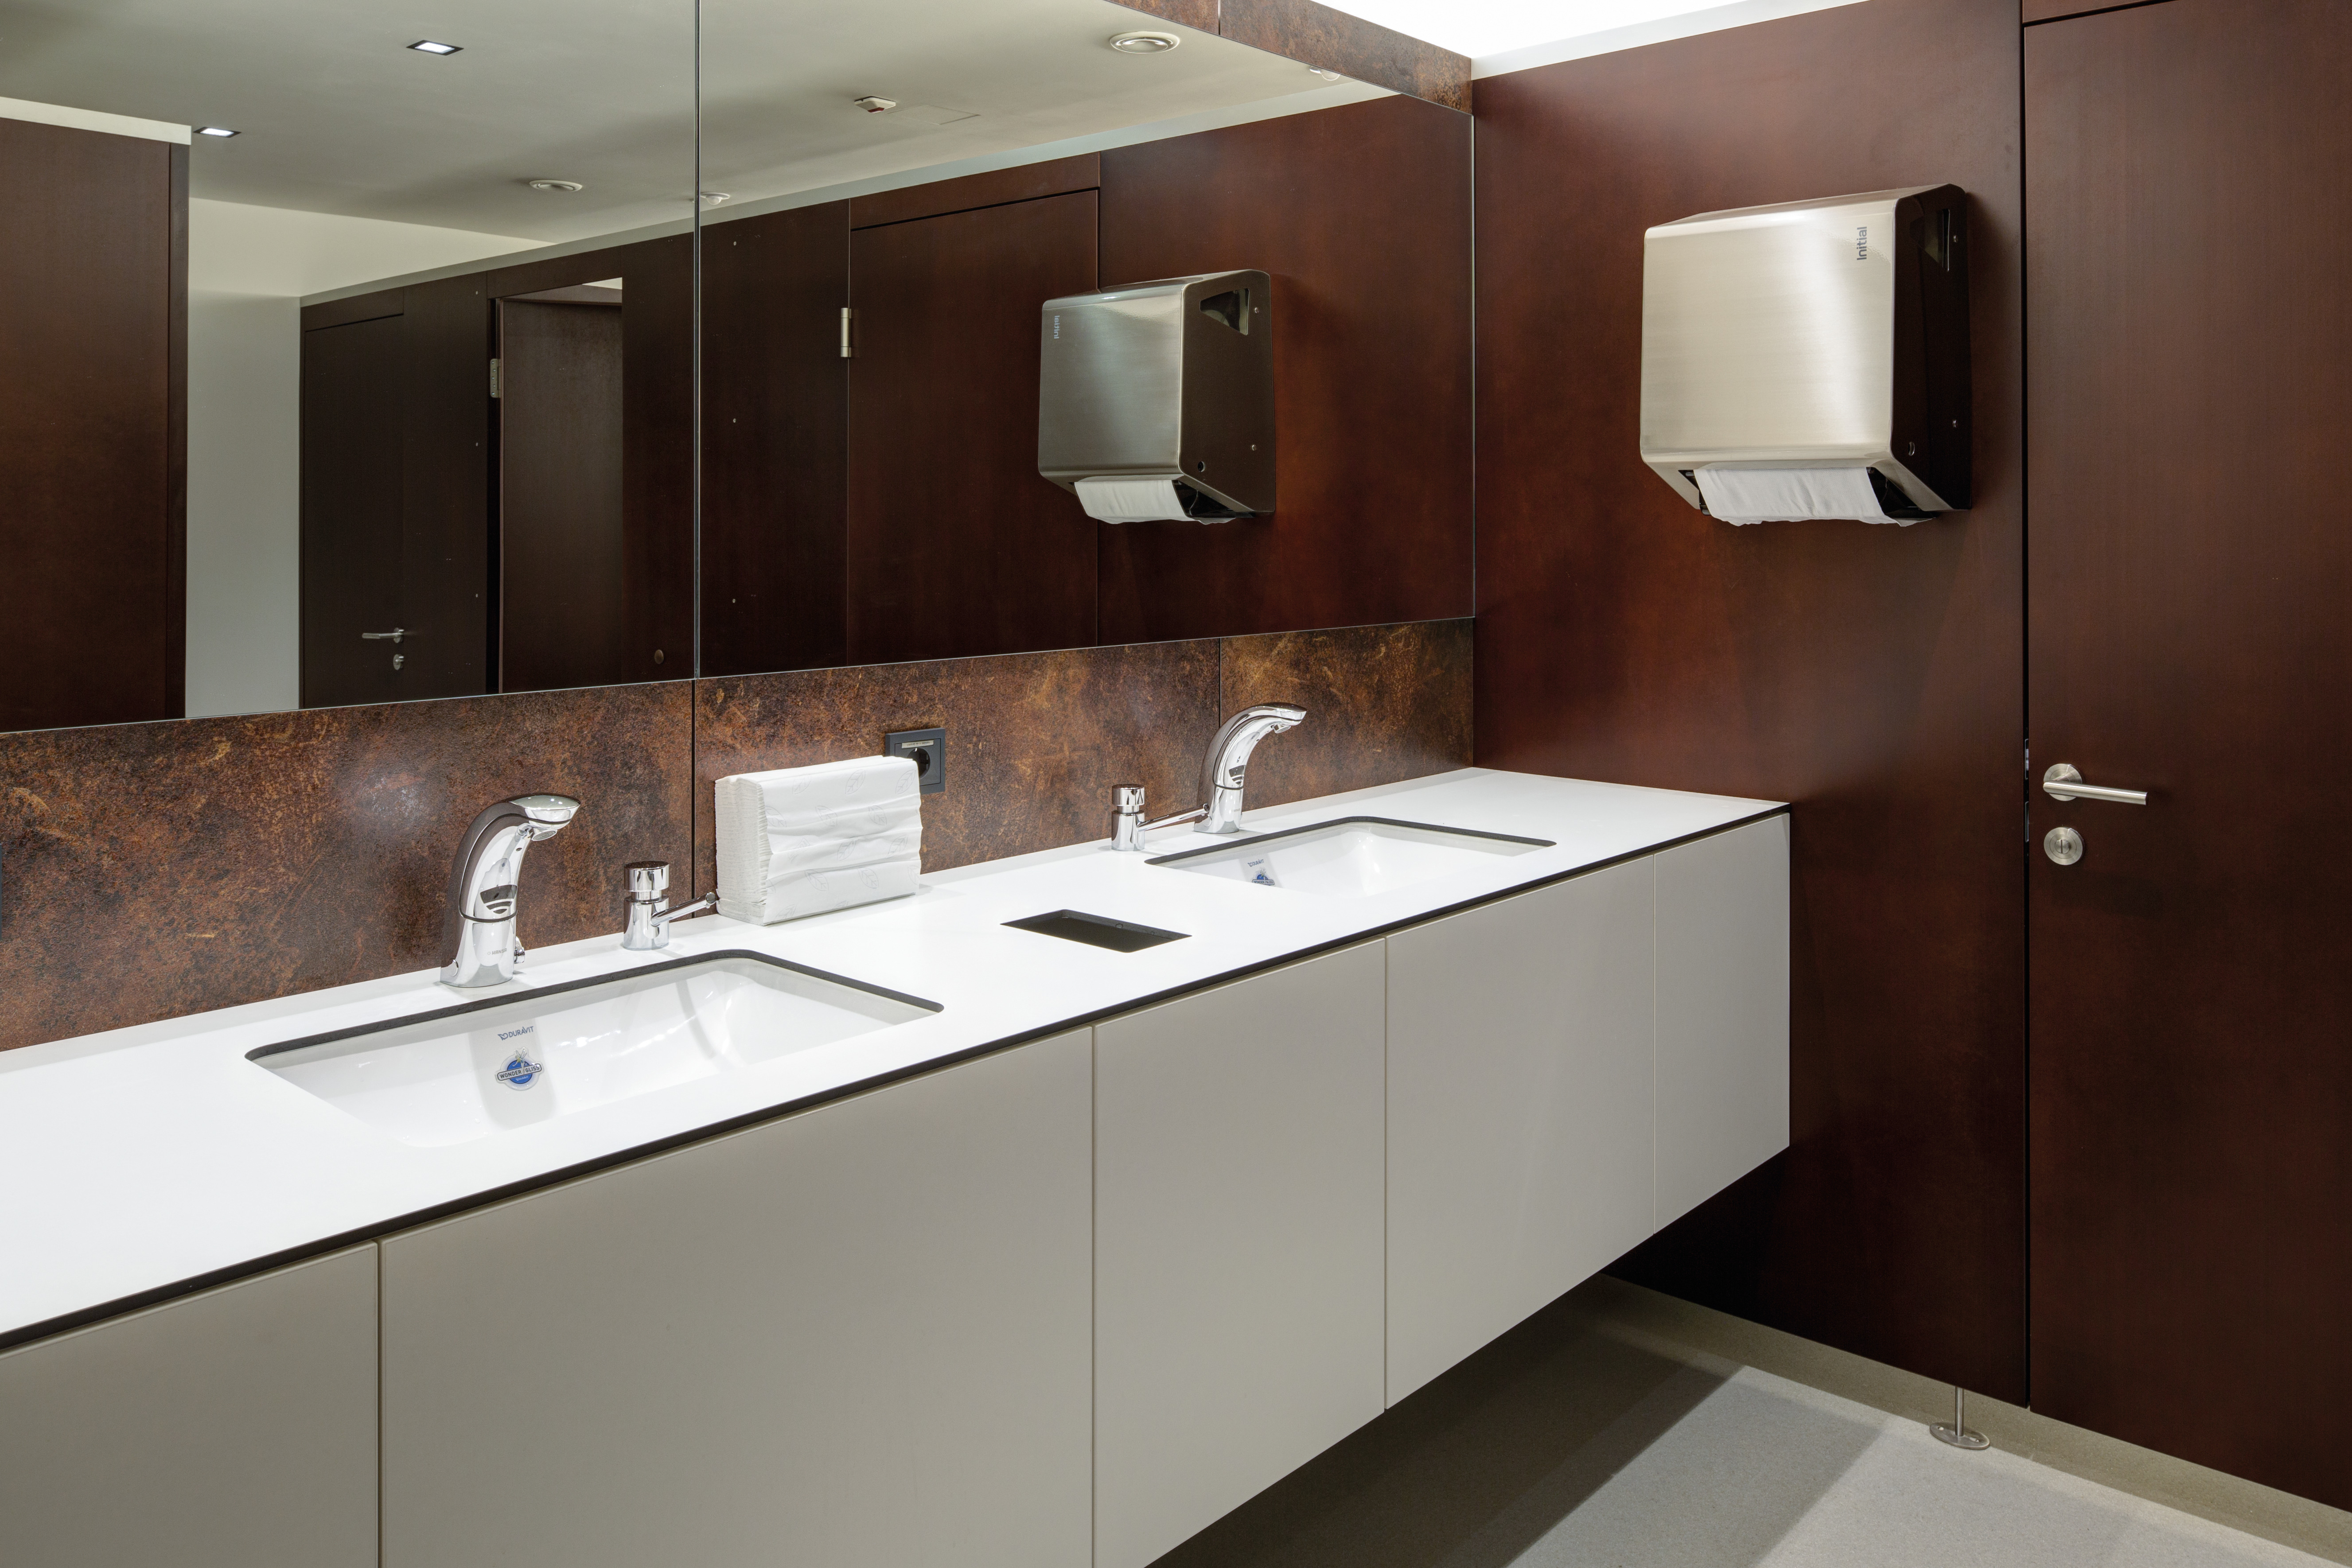 The compact laminate is perfectly suited for use in humid spaces. © Thomas Plattner